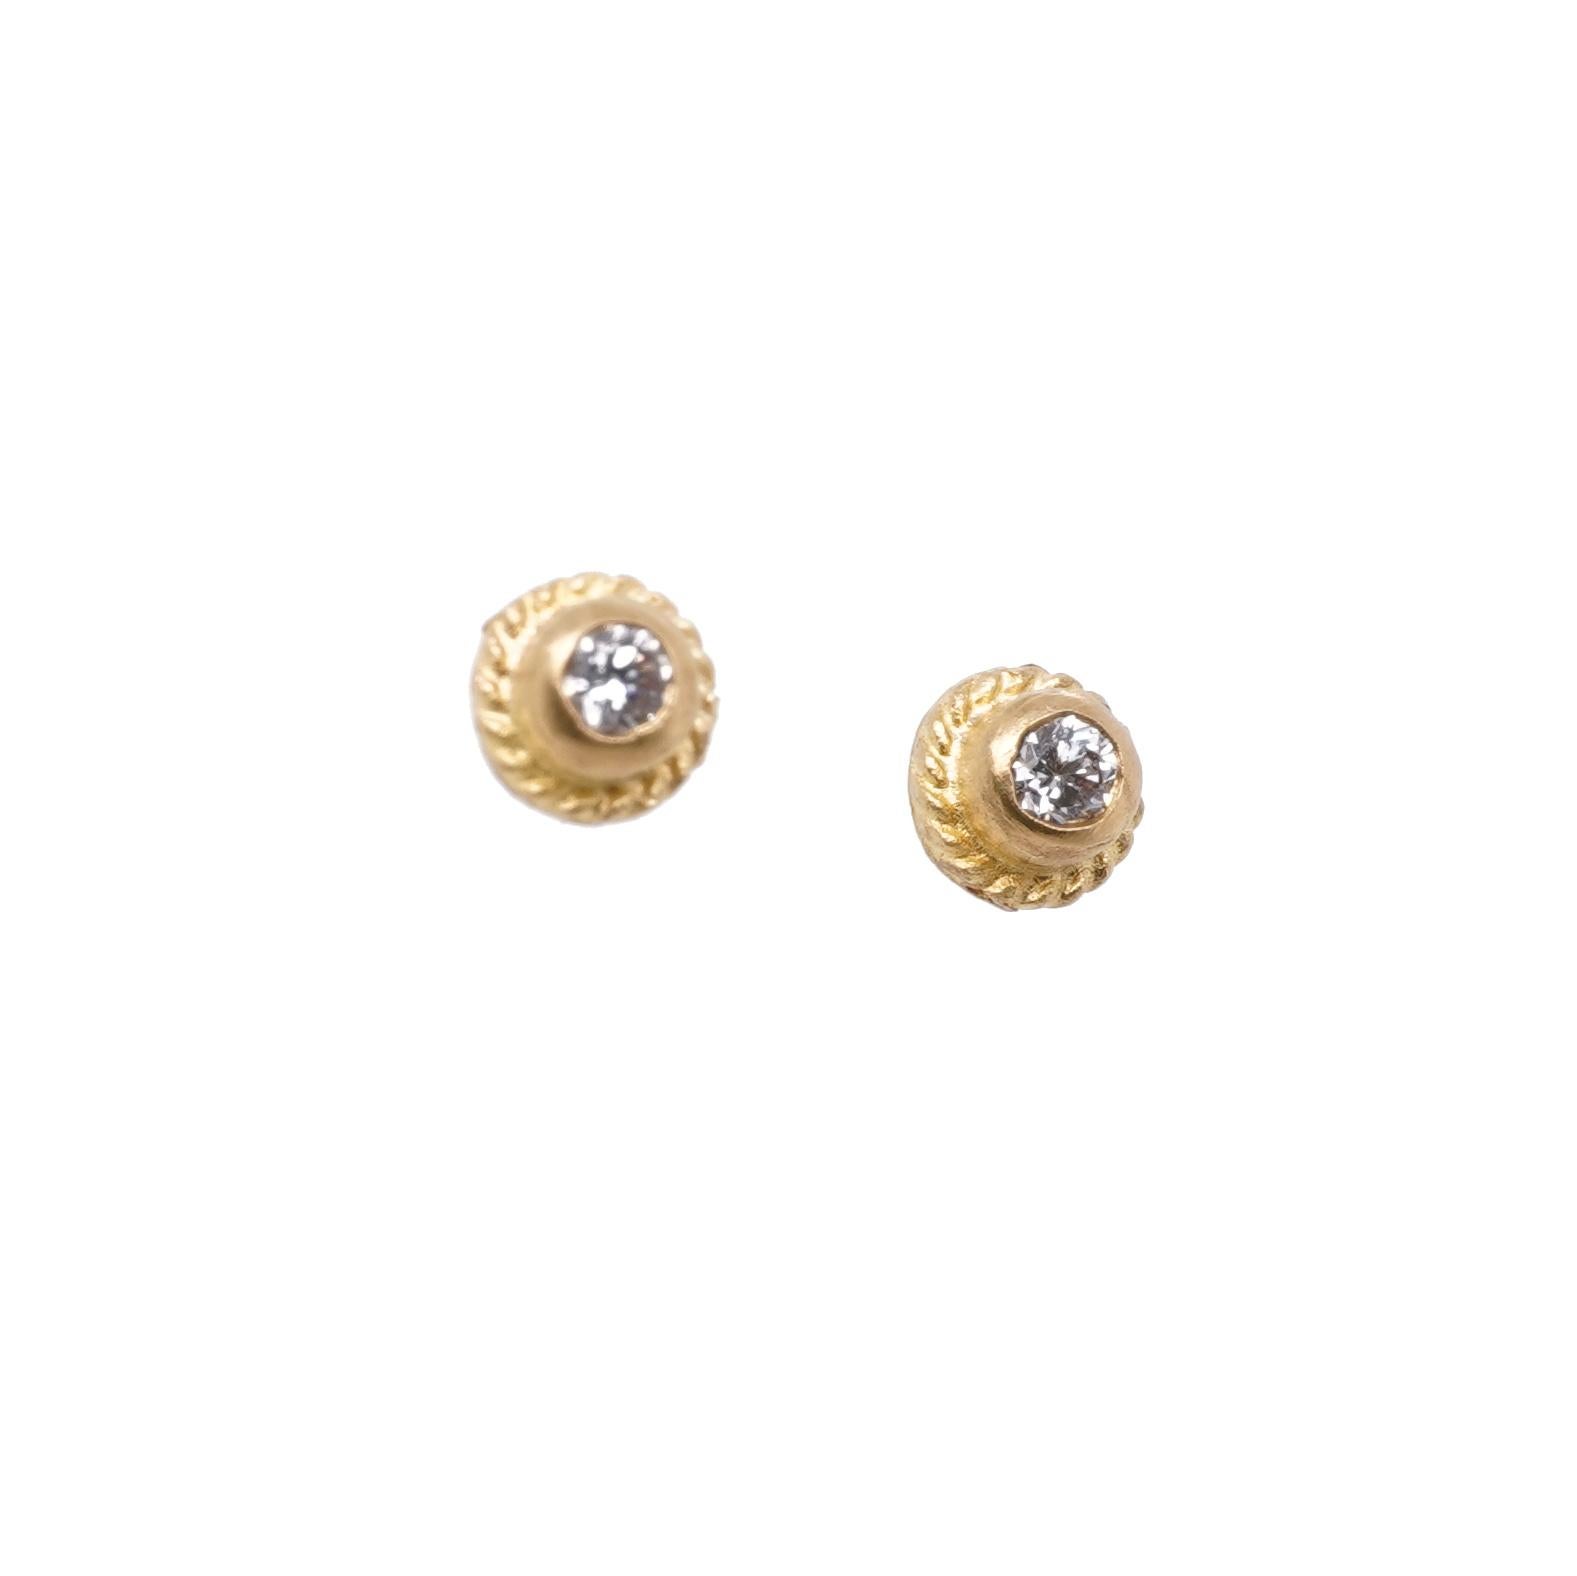 0.18 ct Diamond Circle Textured Stud Earrings, 24kt Solid Gold In New Condition For Sale In Bozeman, MT